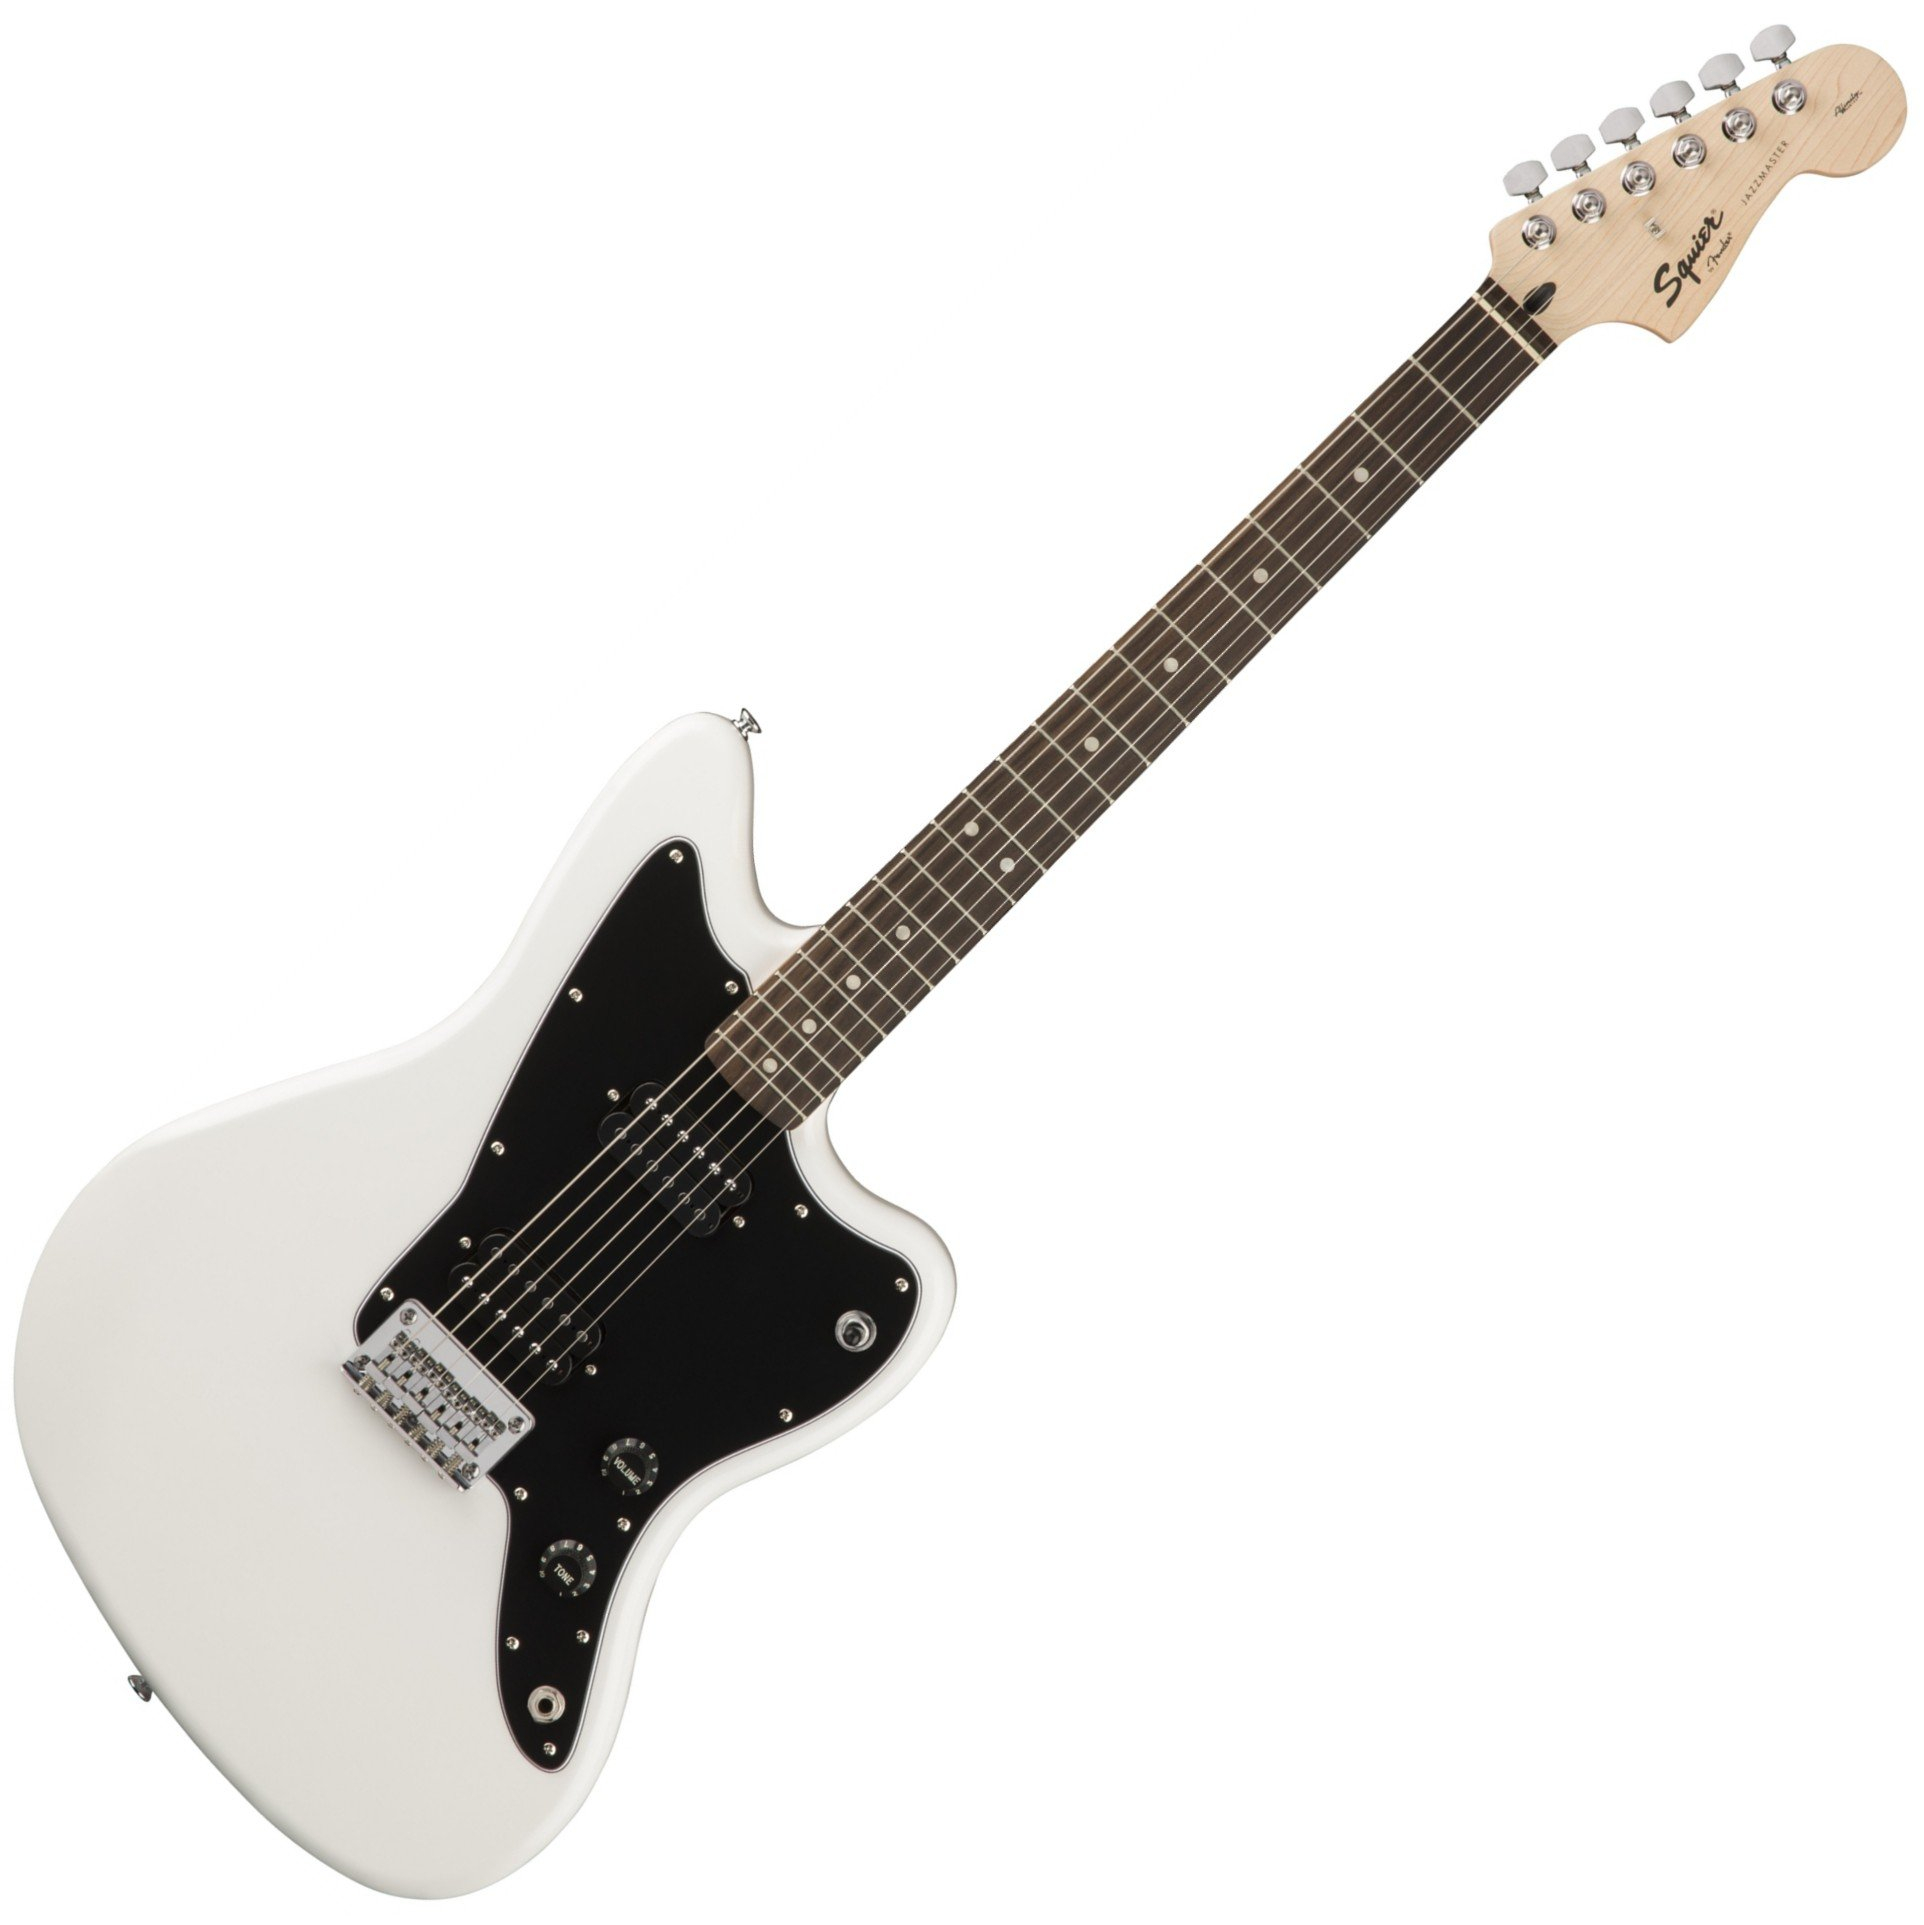 Squier by Fender Affinity Series Jazzmaster Electric Guitar Review 